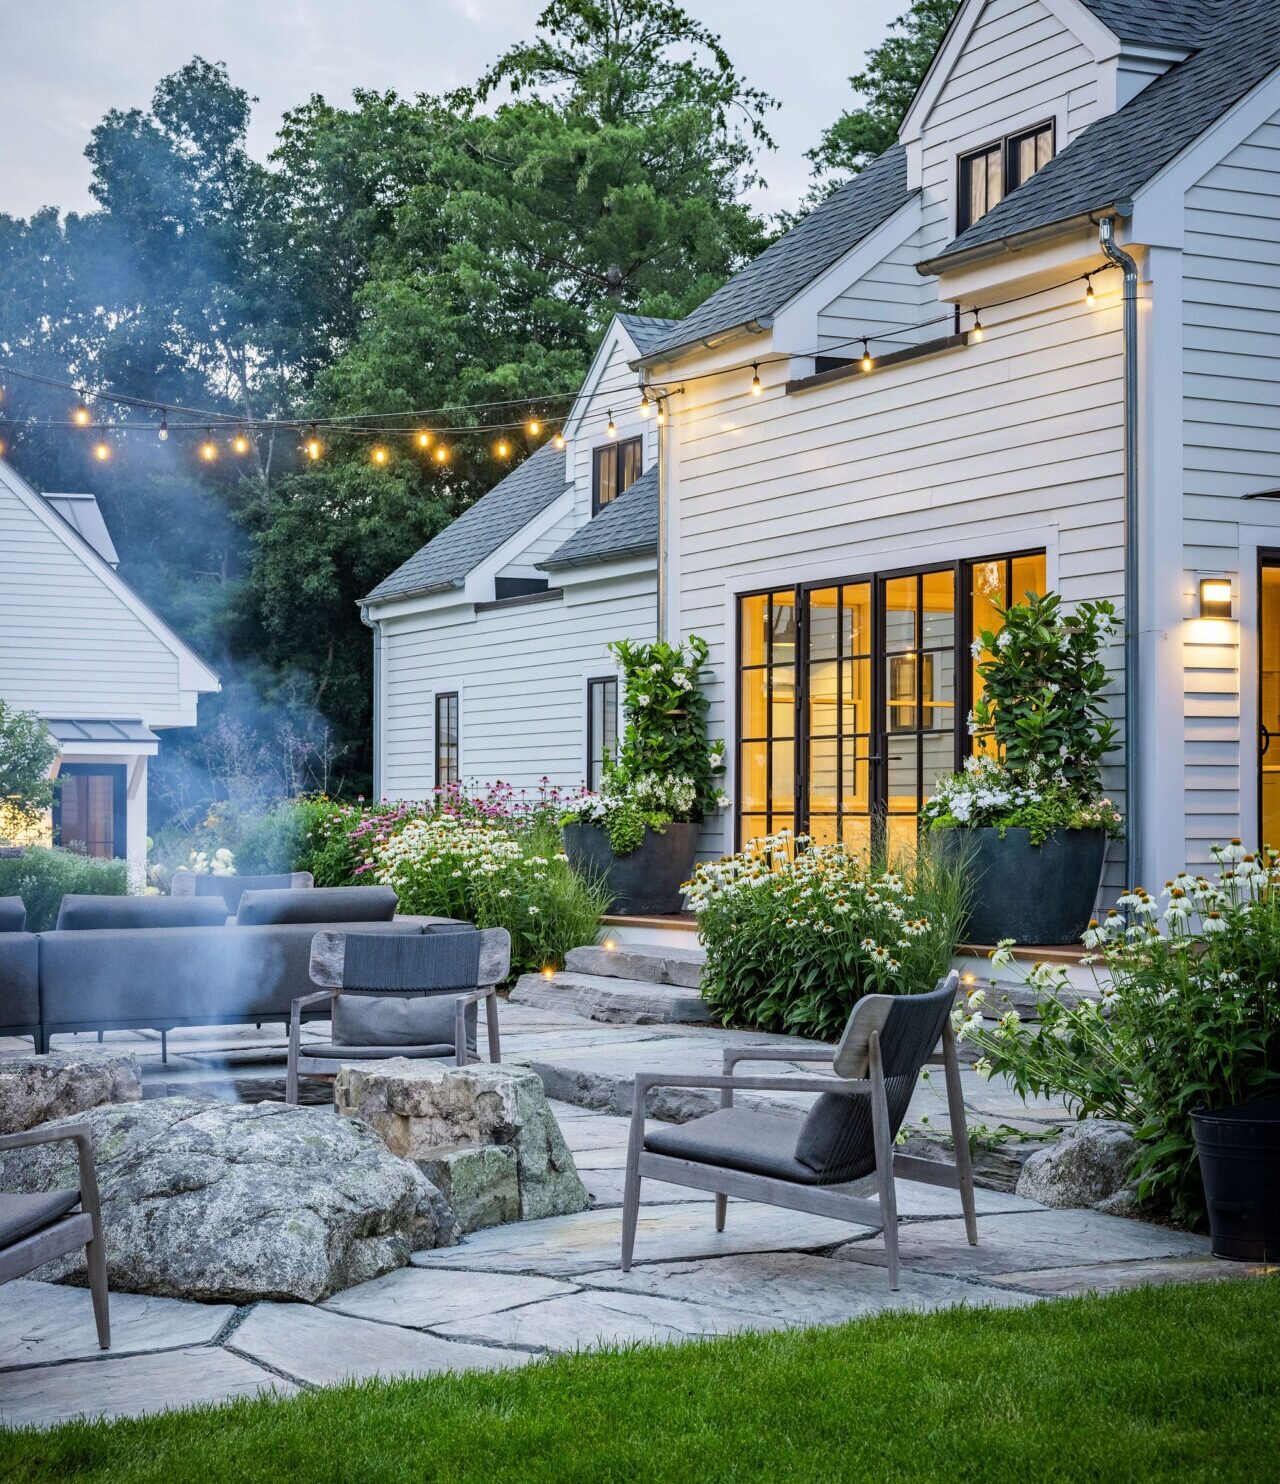 A cozy backyard setting at dusk with stylish outdoor furniture, string lights, plants, and a modern house with illumined windows and white siding.